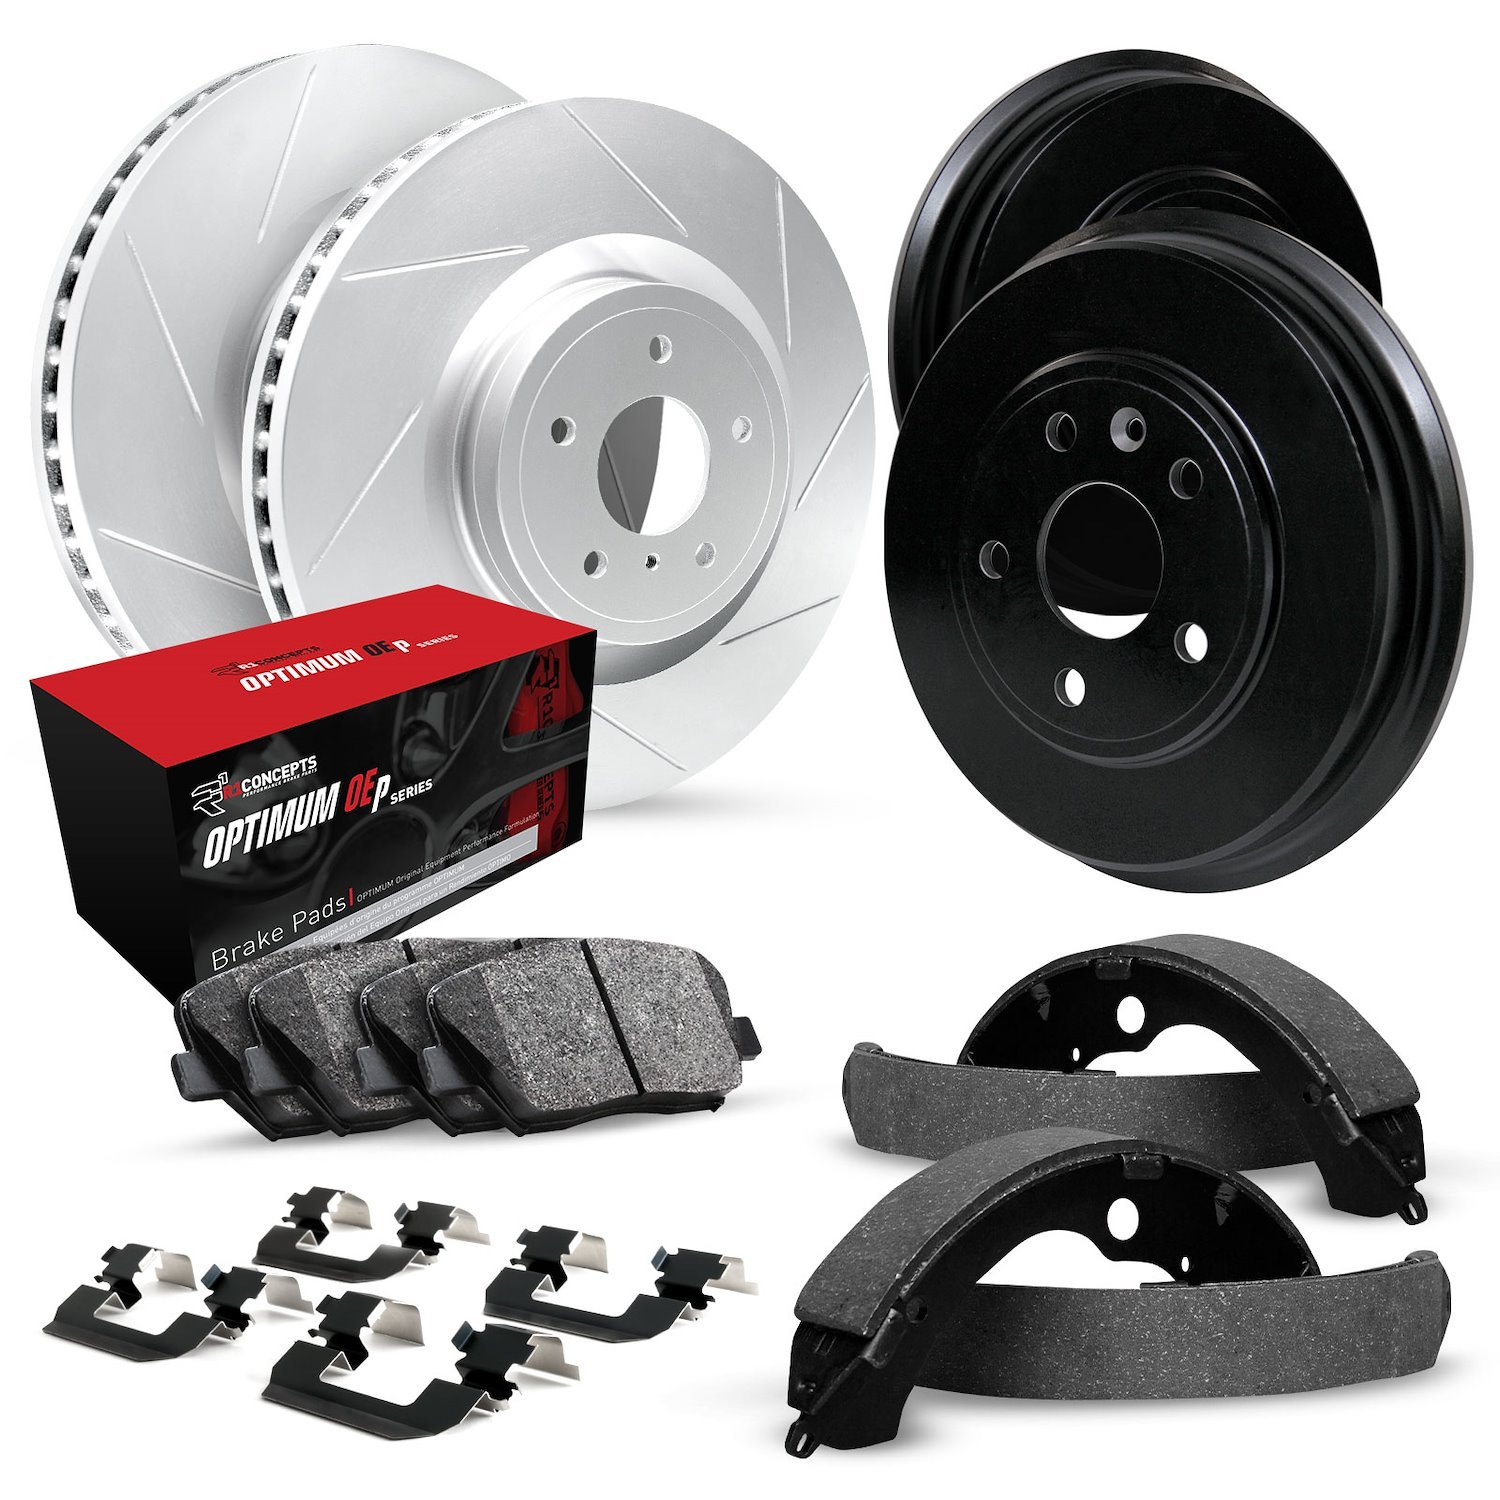 GEO-Carbon Slotted Brake Rotor & Drum Set w/Optimum OE Pads, Shoes, & Hardware, 1982-1982 GM, Position: Front & Rear